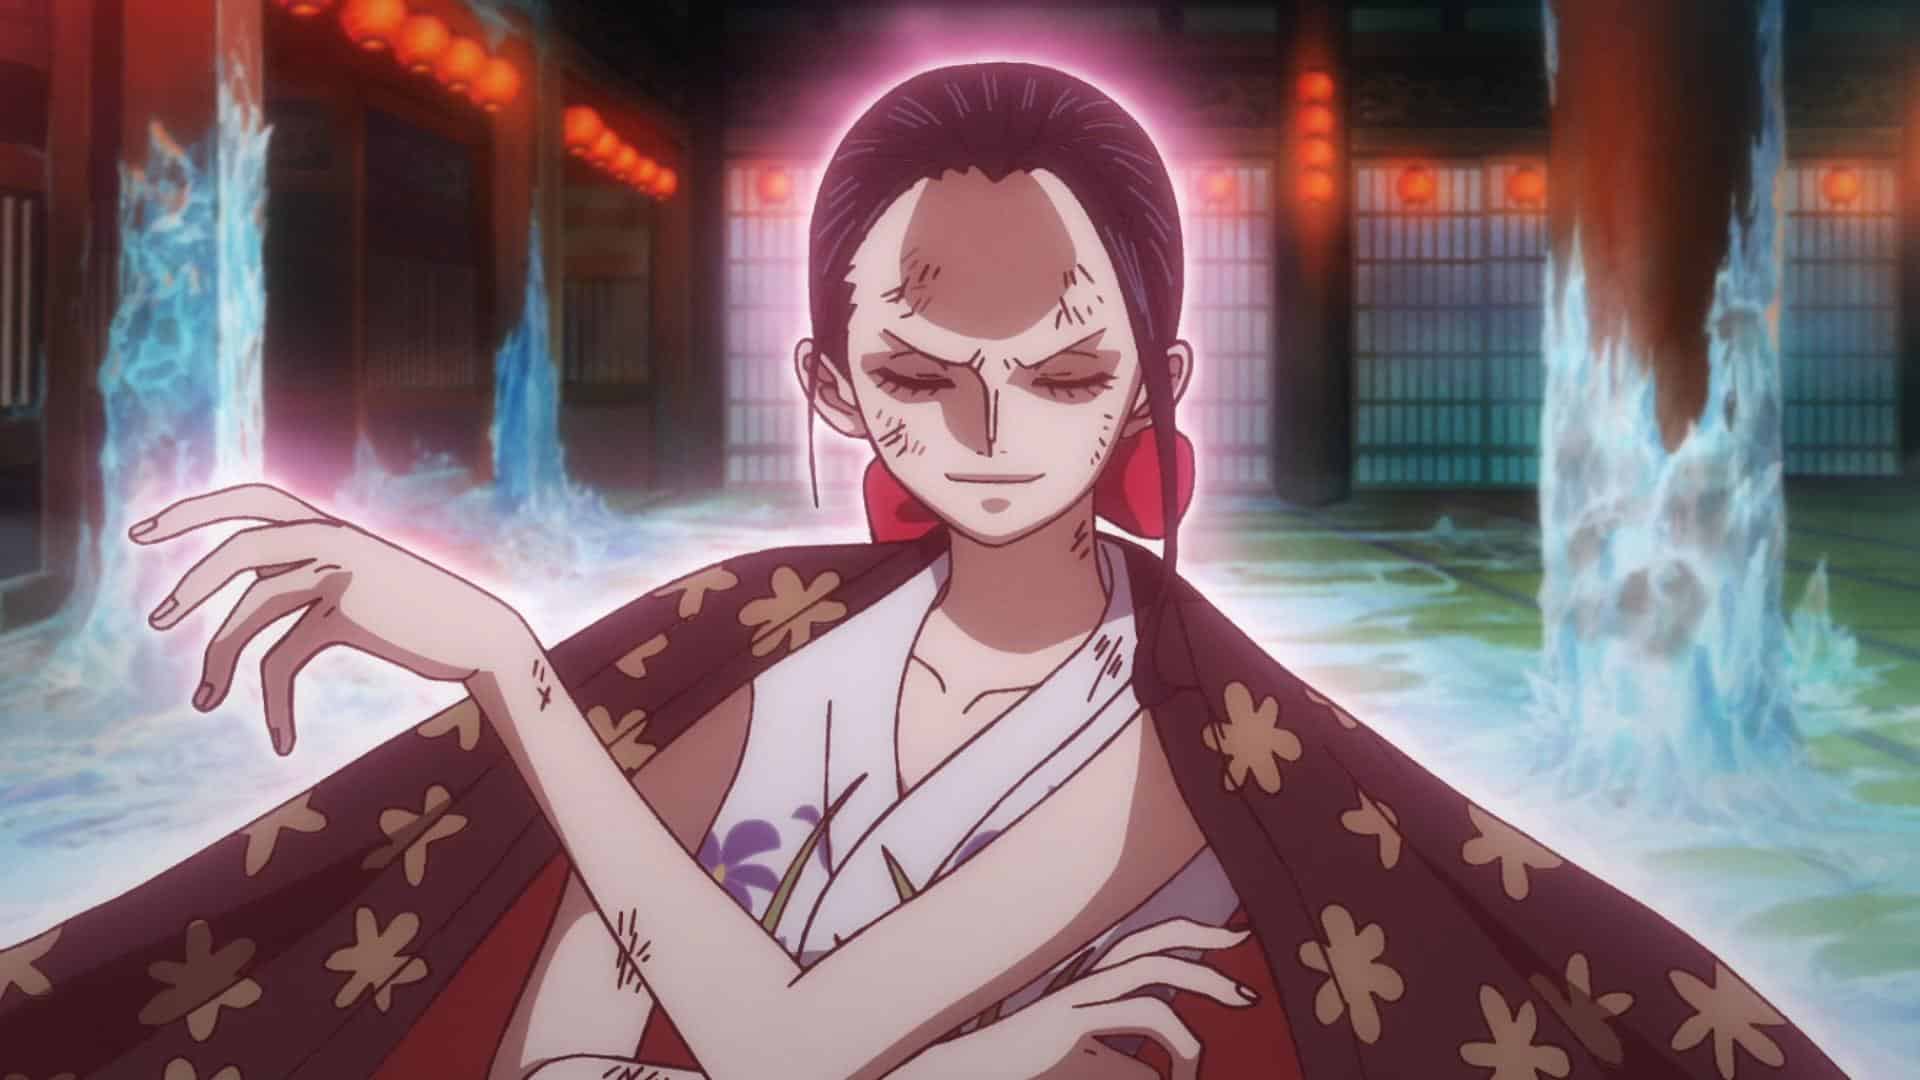 A still from One Piece featuring Nico Robin